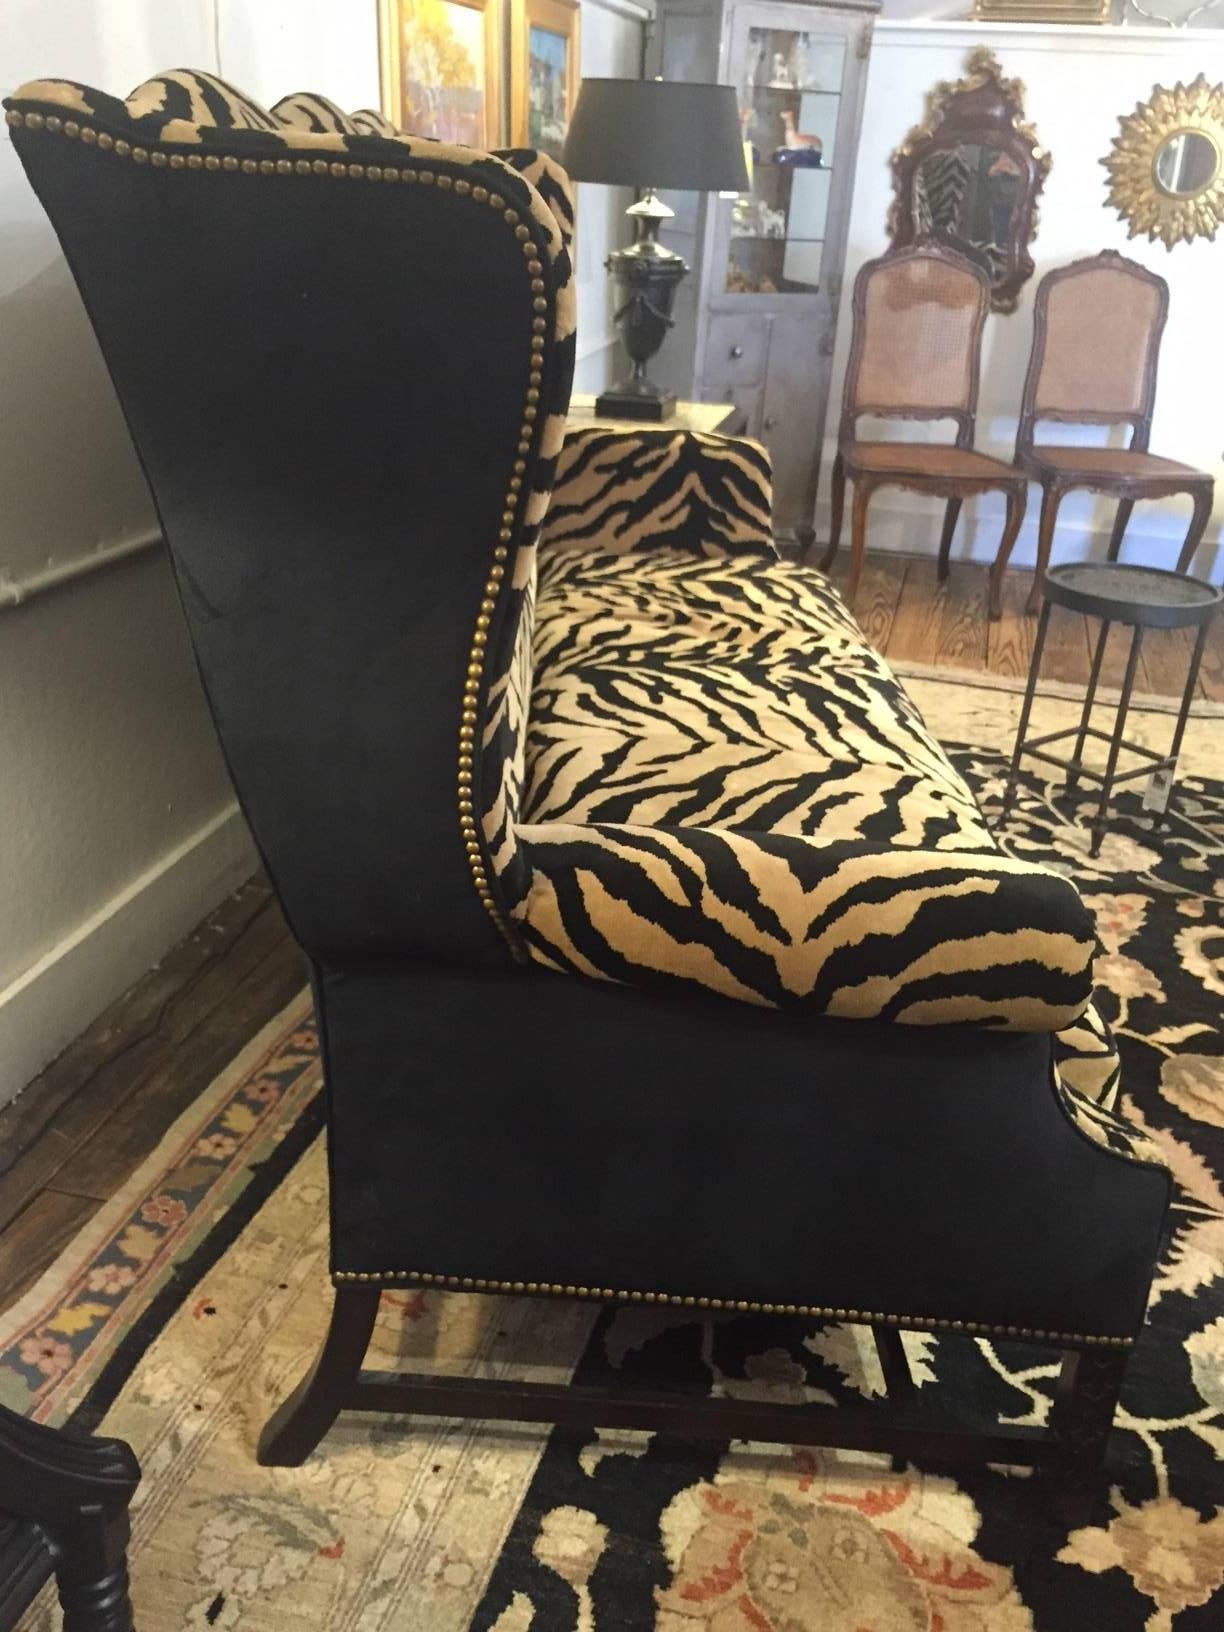 Showstopper of a sofa, over the top and glamorous having a wonderful wing chair shape with very high back, curved sides and arms, carved mahogany base and feet, dressed up in luscious camel and black zebra patterned mohair on the front, black mohair